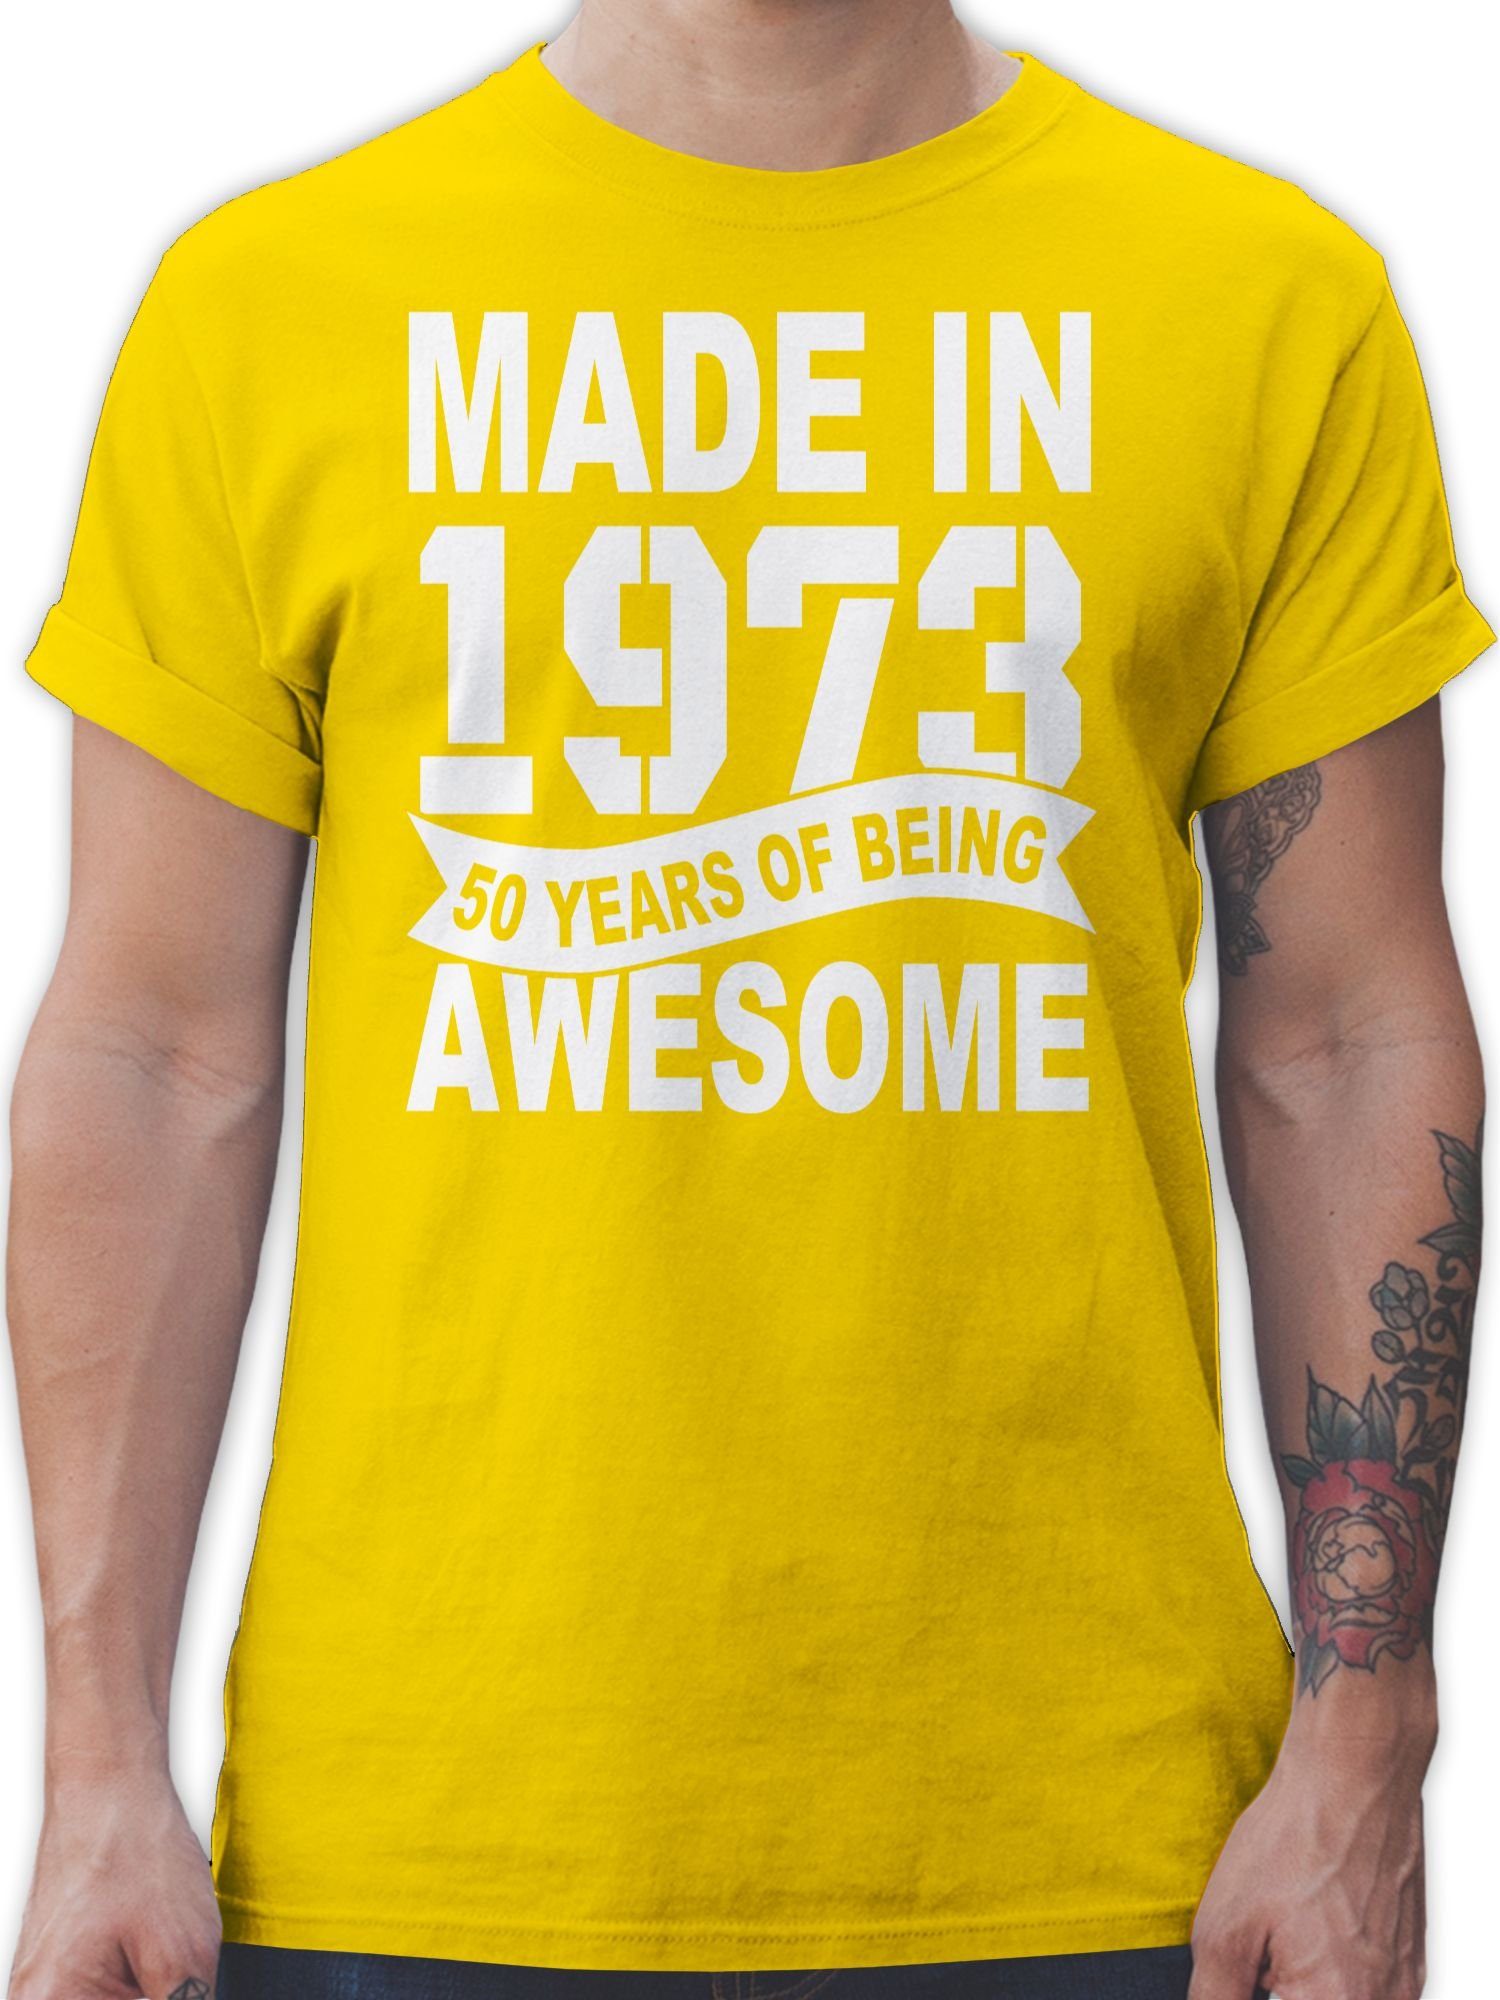 Made awesome 2 1973 Geburtstag Fifty Shirtracer weiß of years being 50. T-Shirt Gelb in